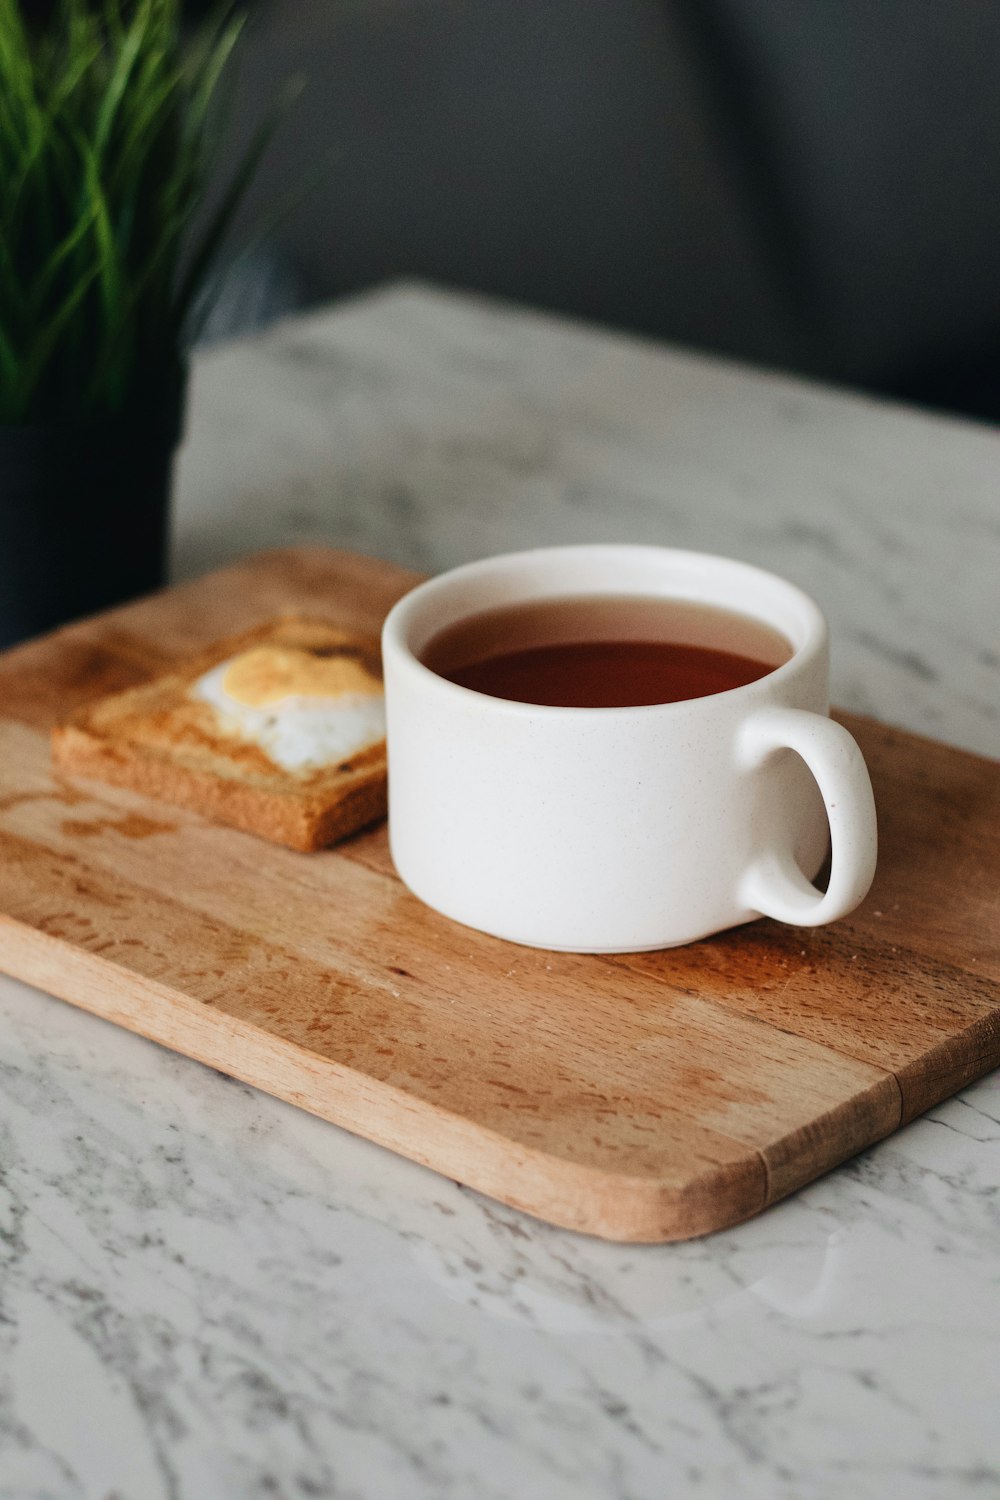 a cup of tea and a piece of bread on a cutting board